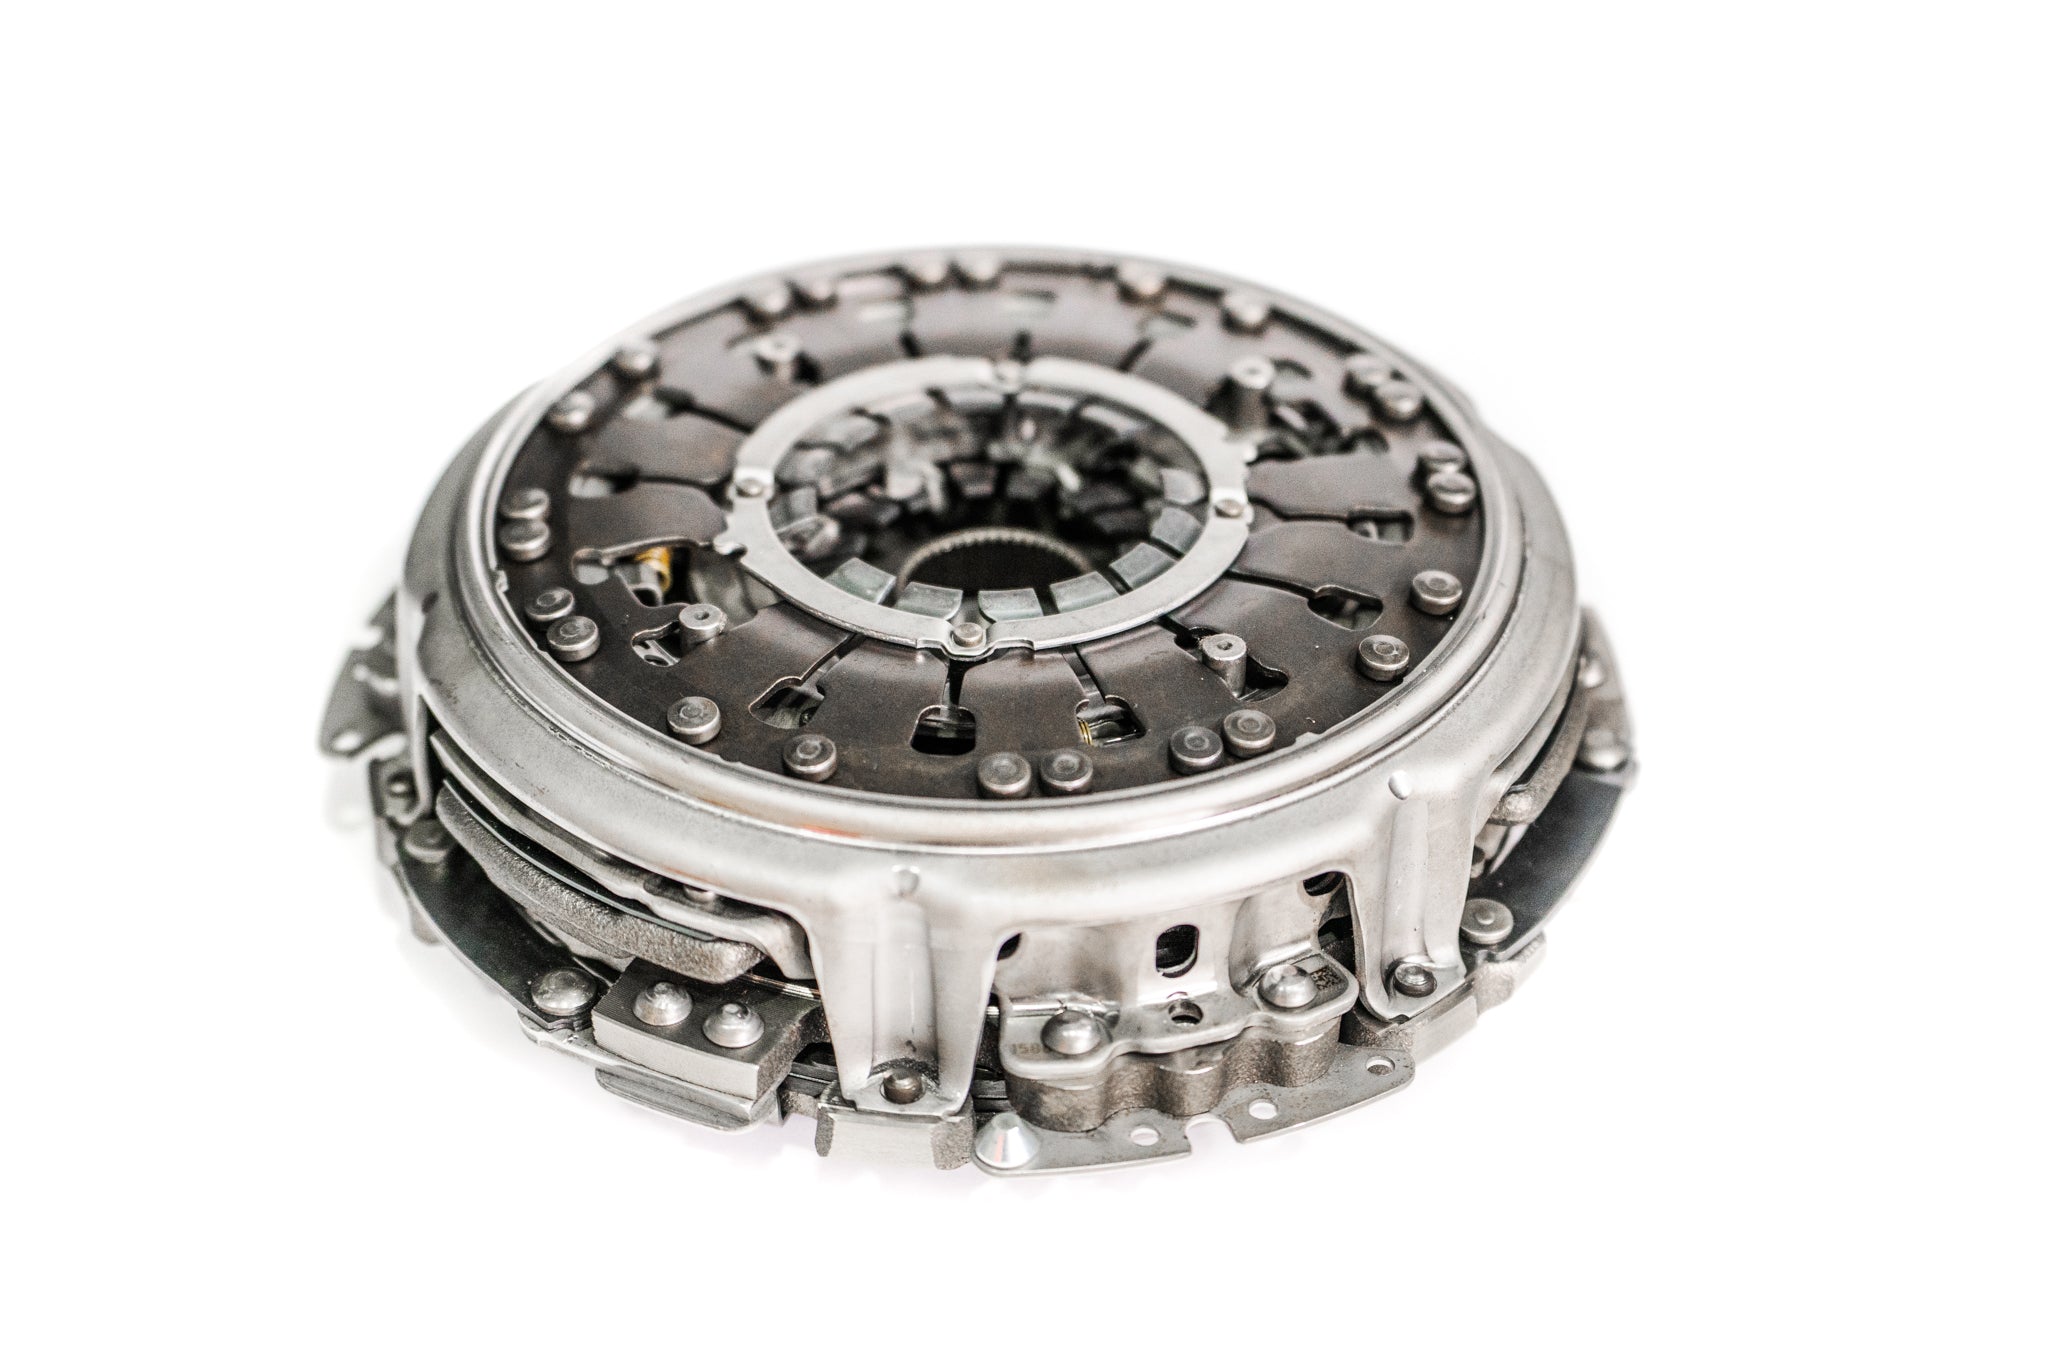 DSG DQ200 Gen 1 Upgraded Clutch with Kevlar Discs up to 470 Nm - RTMG Performance